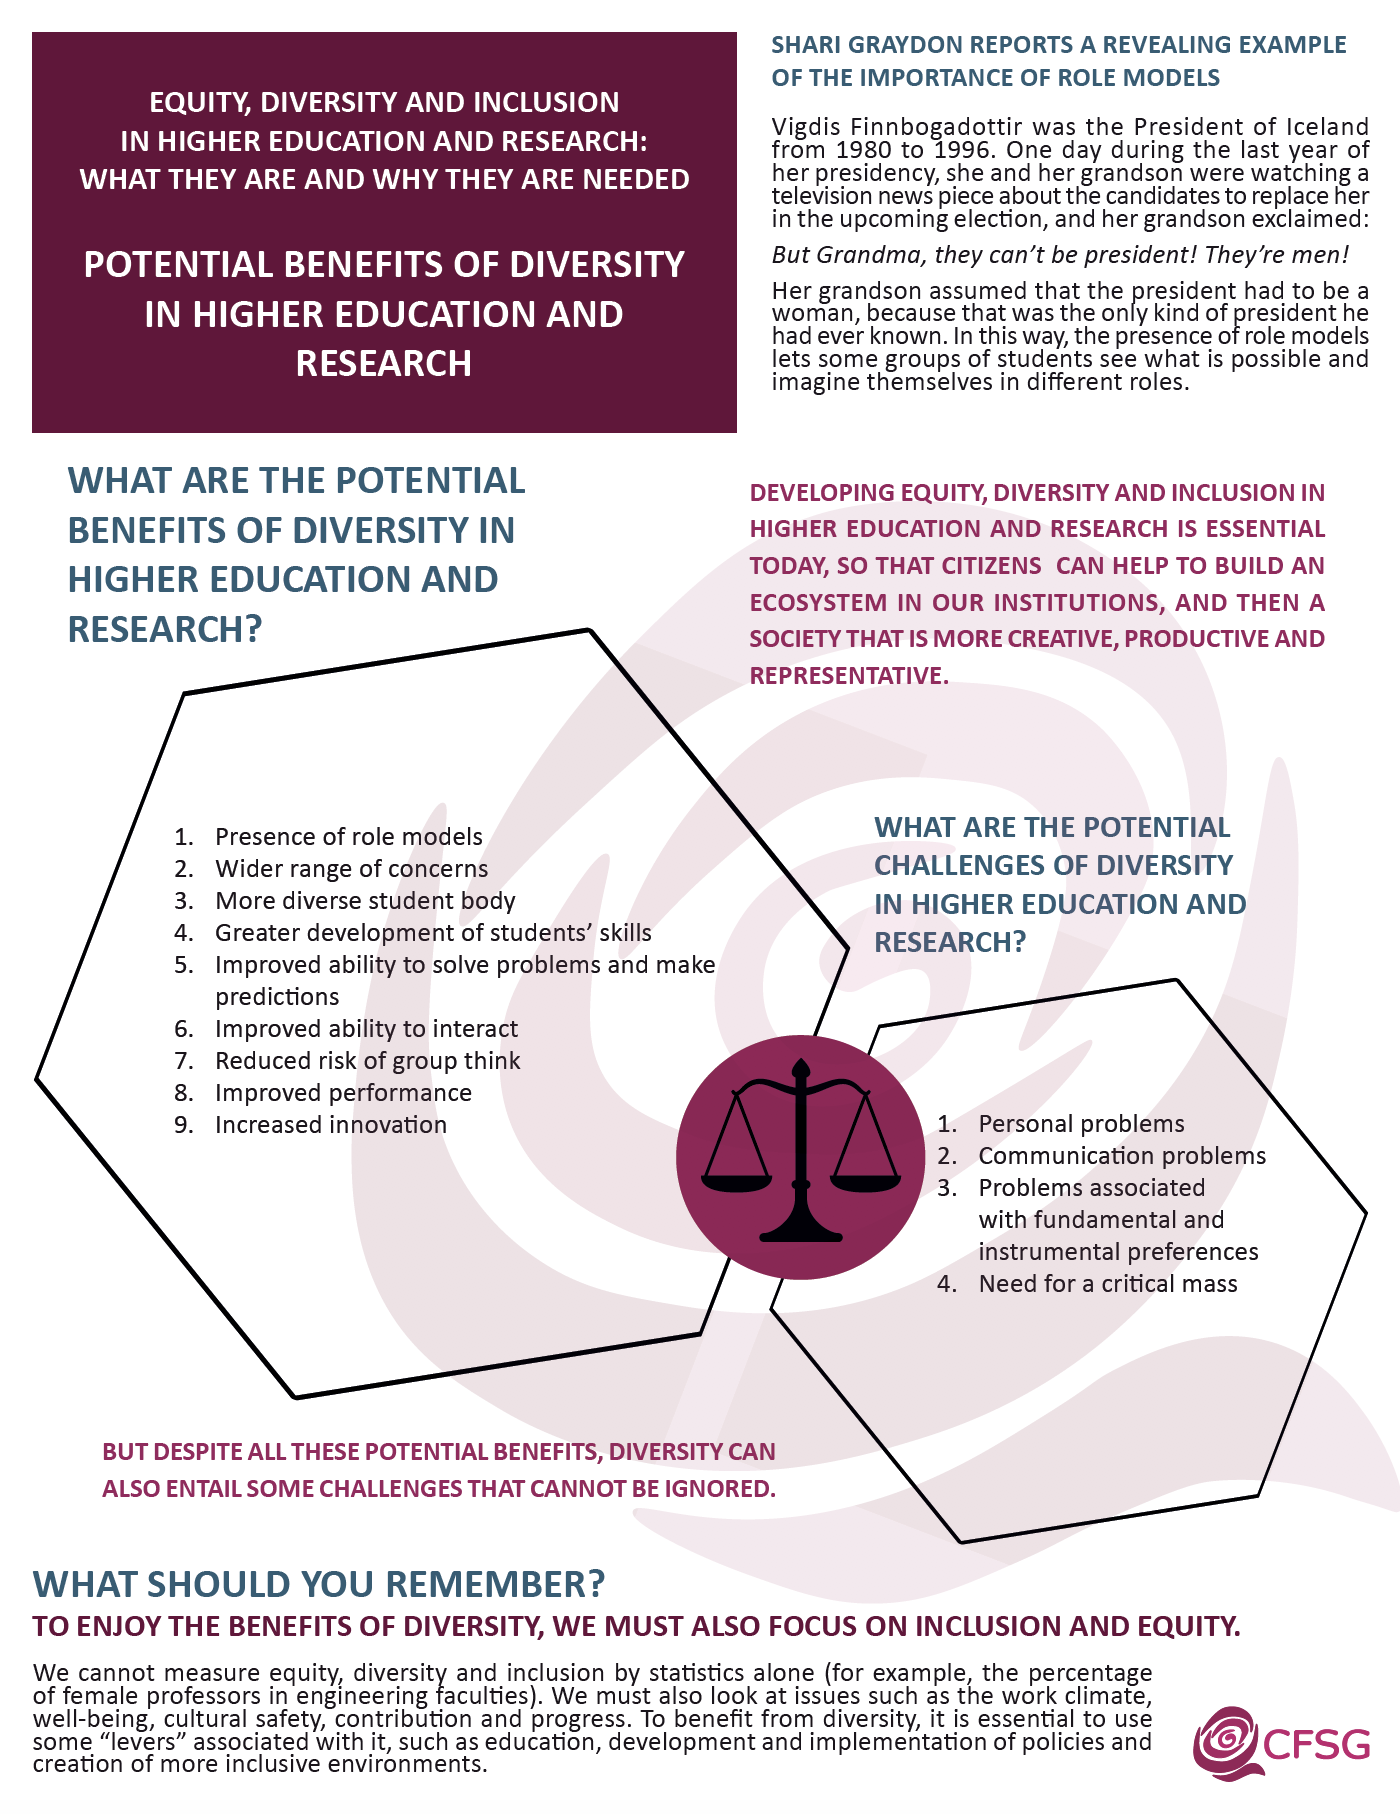 Potential Benefits of Diversity in Higher Education and Reseach